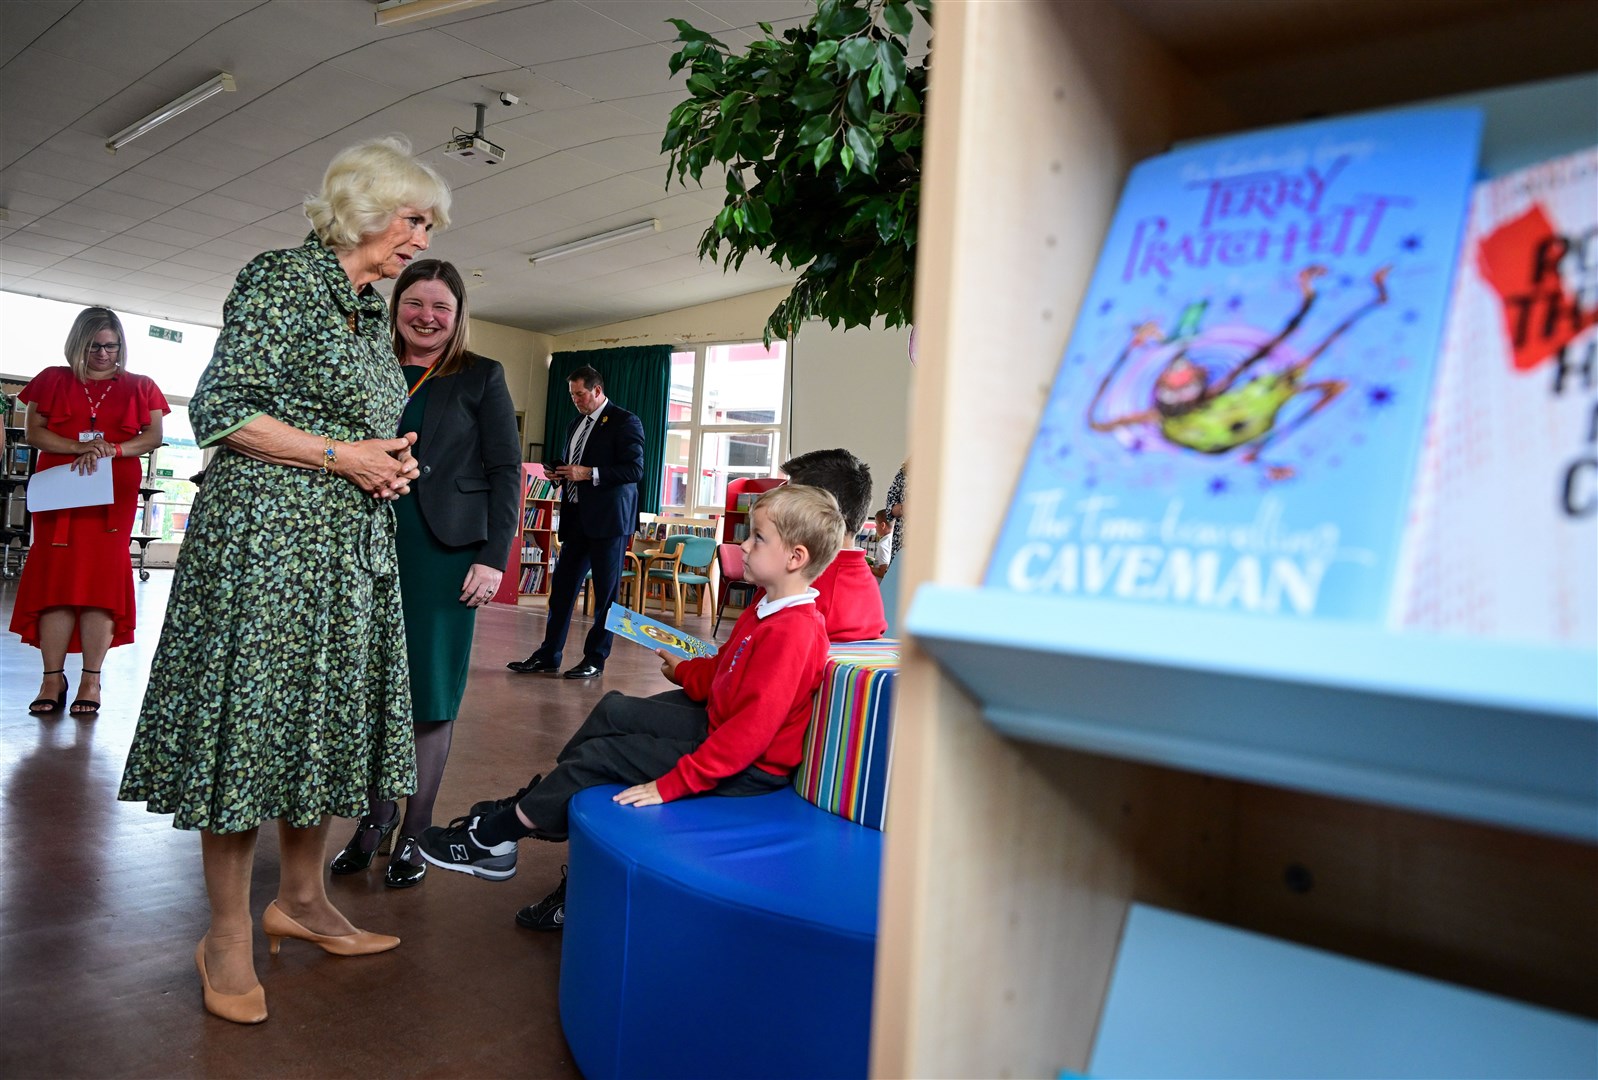 Camilla opened a new school library in July this year in her role as patron of the National Literacy Trust (Finbarr Webster/PA)